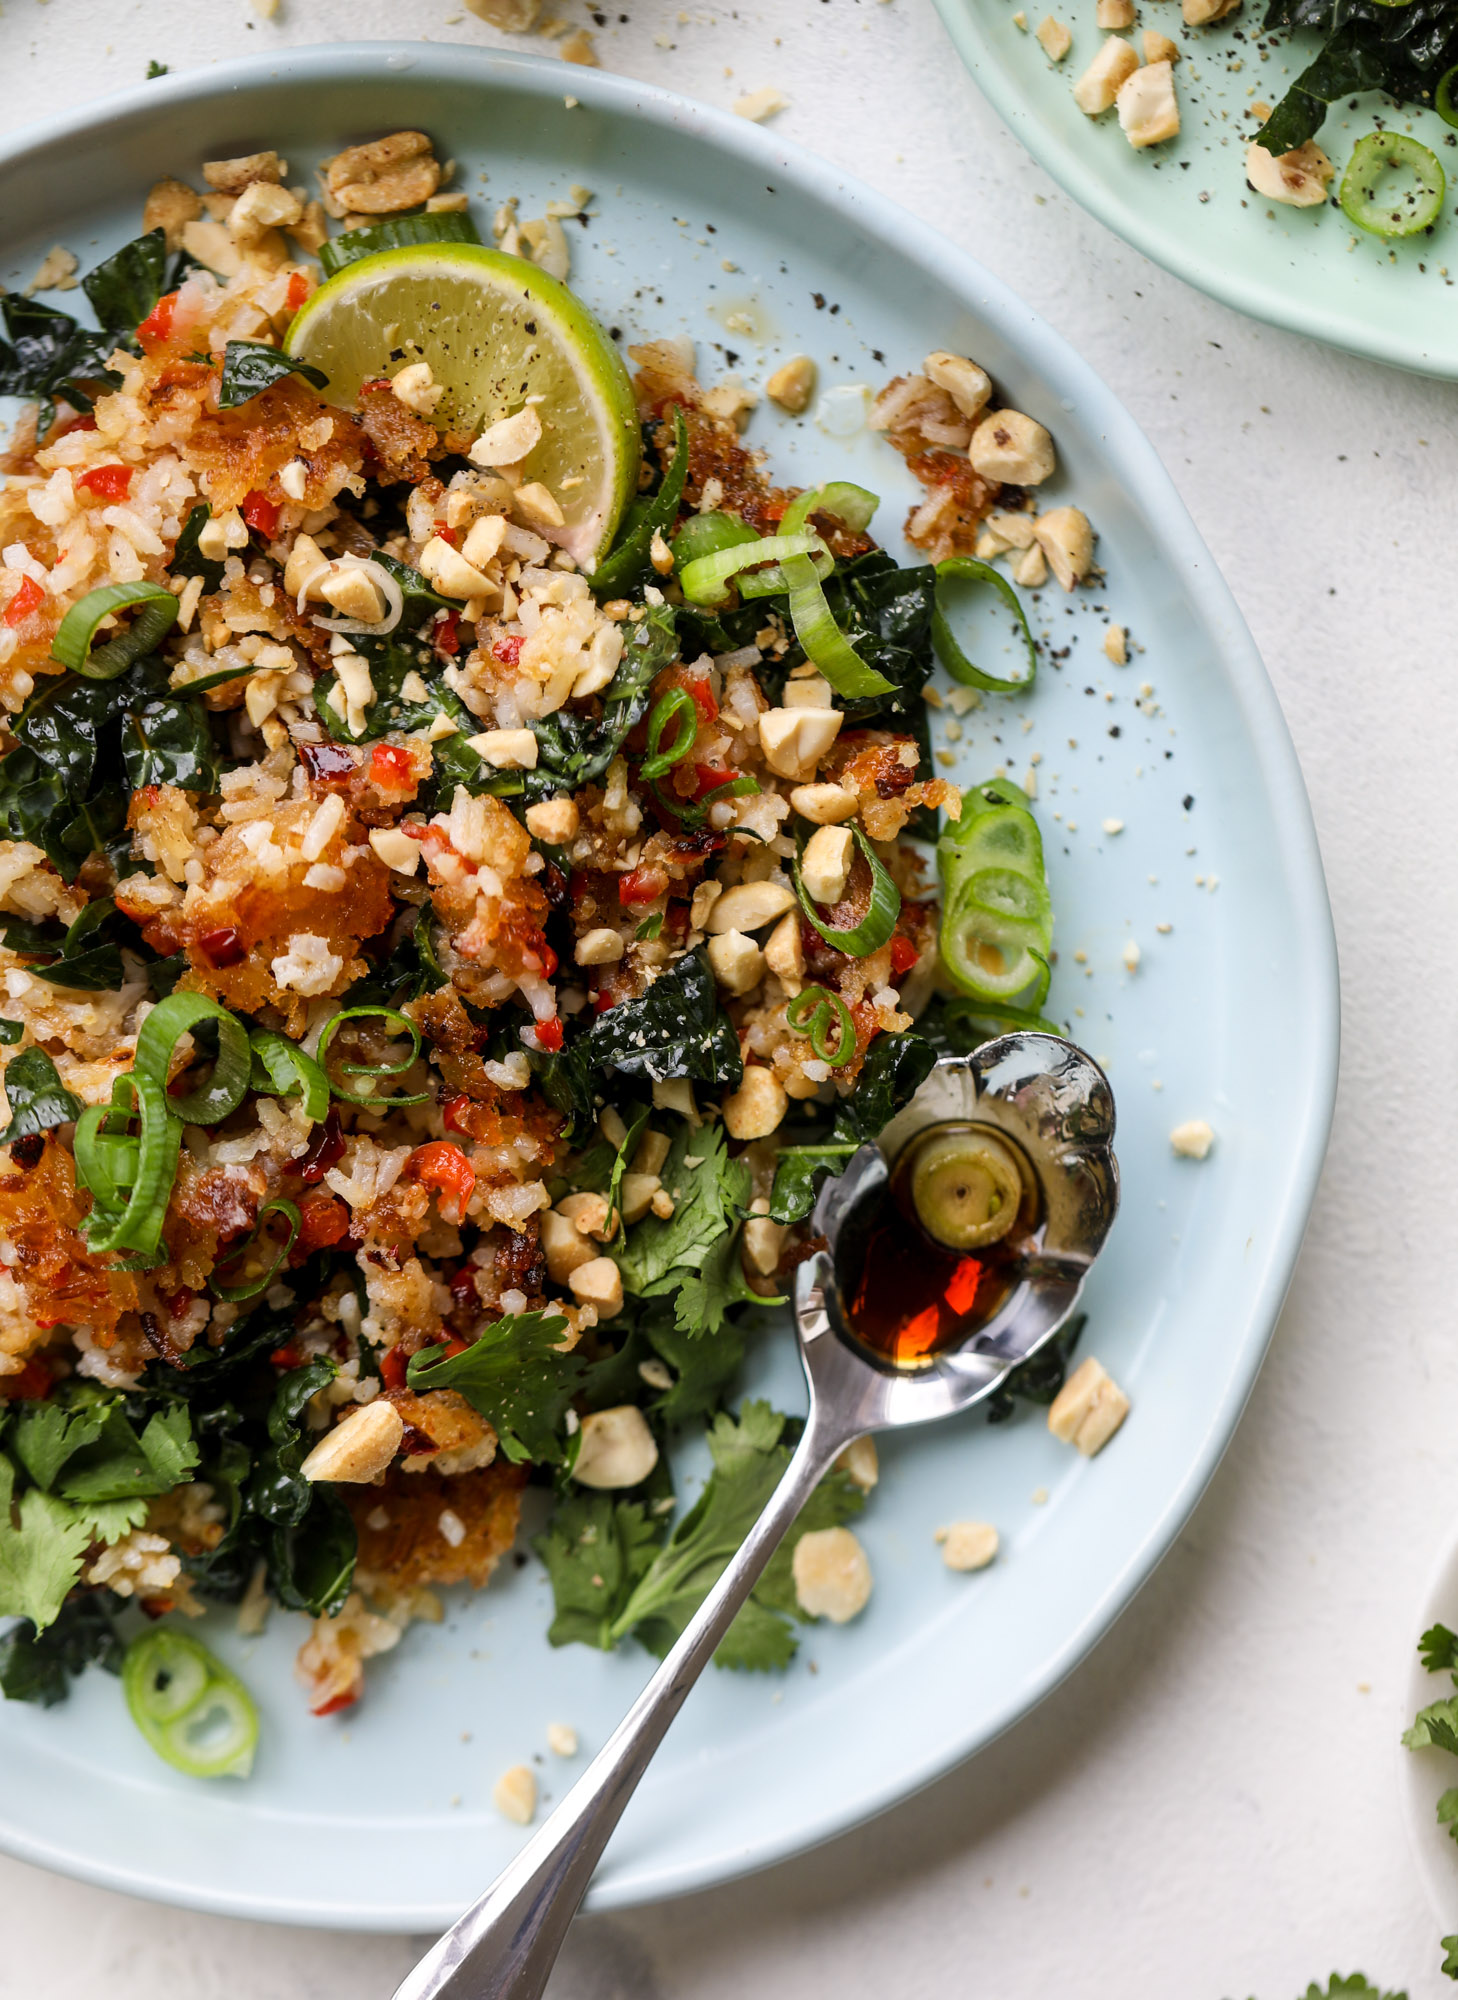 This crispy rice salad is the best lunch I've had in ages! It's full of crunch and crisp, it's satisfying and has lots of green kale so we get our veg in. The crispy rice salad can be a meal, you can add beans or rice or it can even be a side dish. I howsweeteats.com #rice #salad #vegetarian #crispy #kale